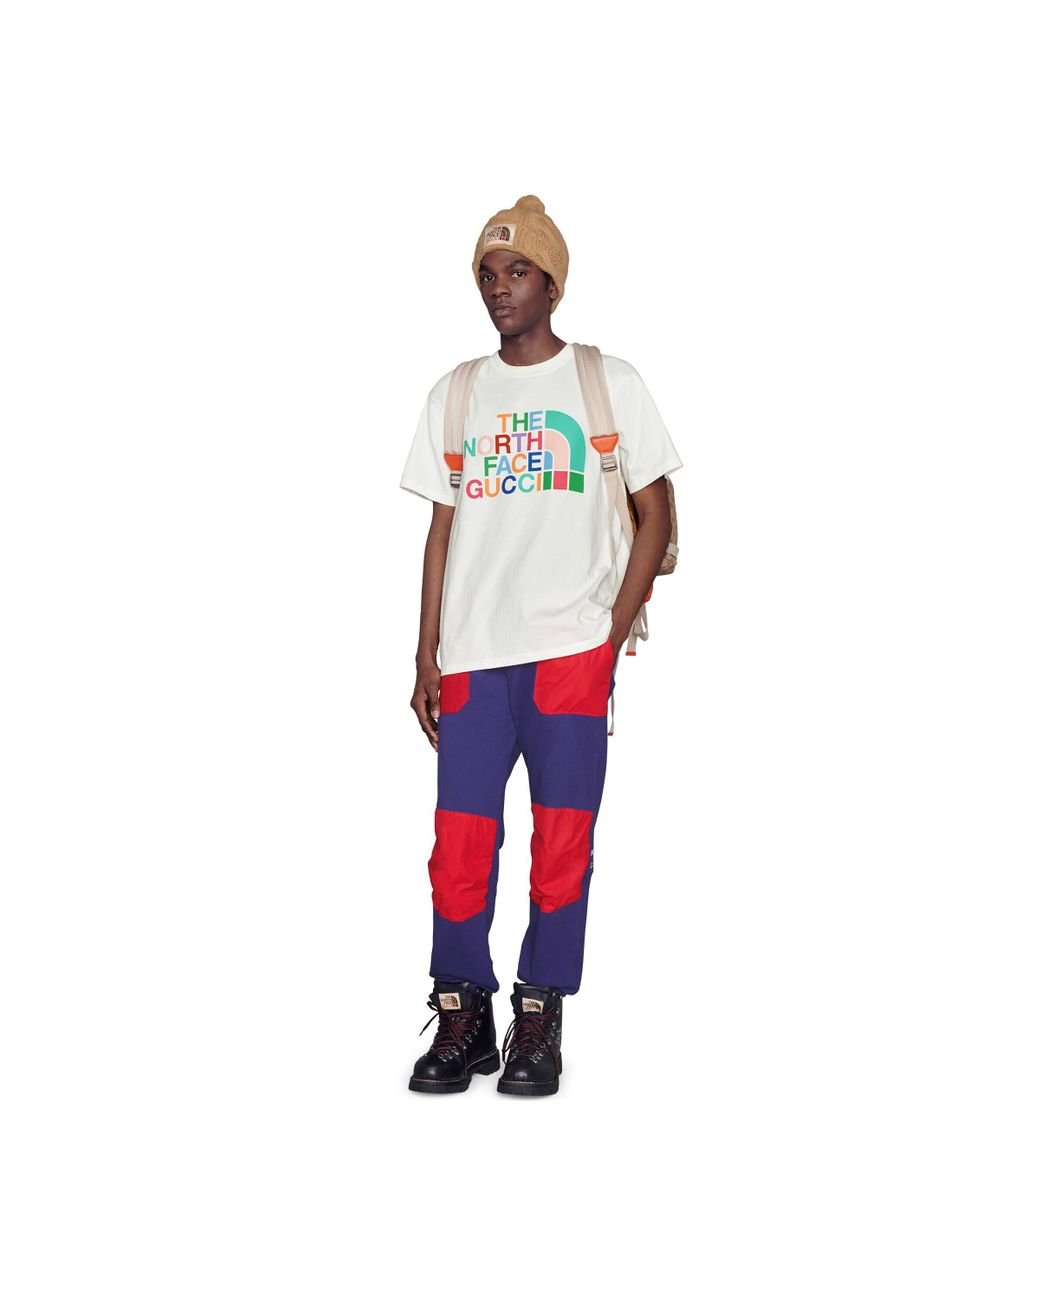 The North Face x Gucci t-shirt White – Limited Supply ZA